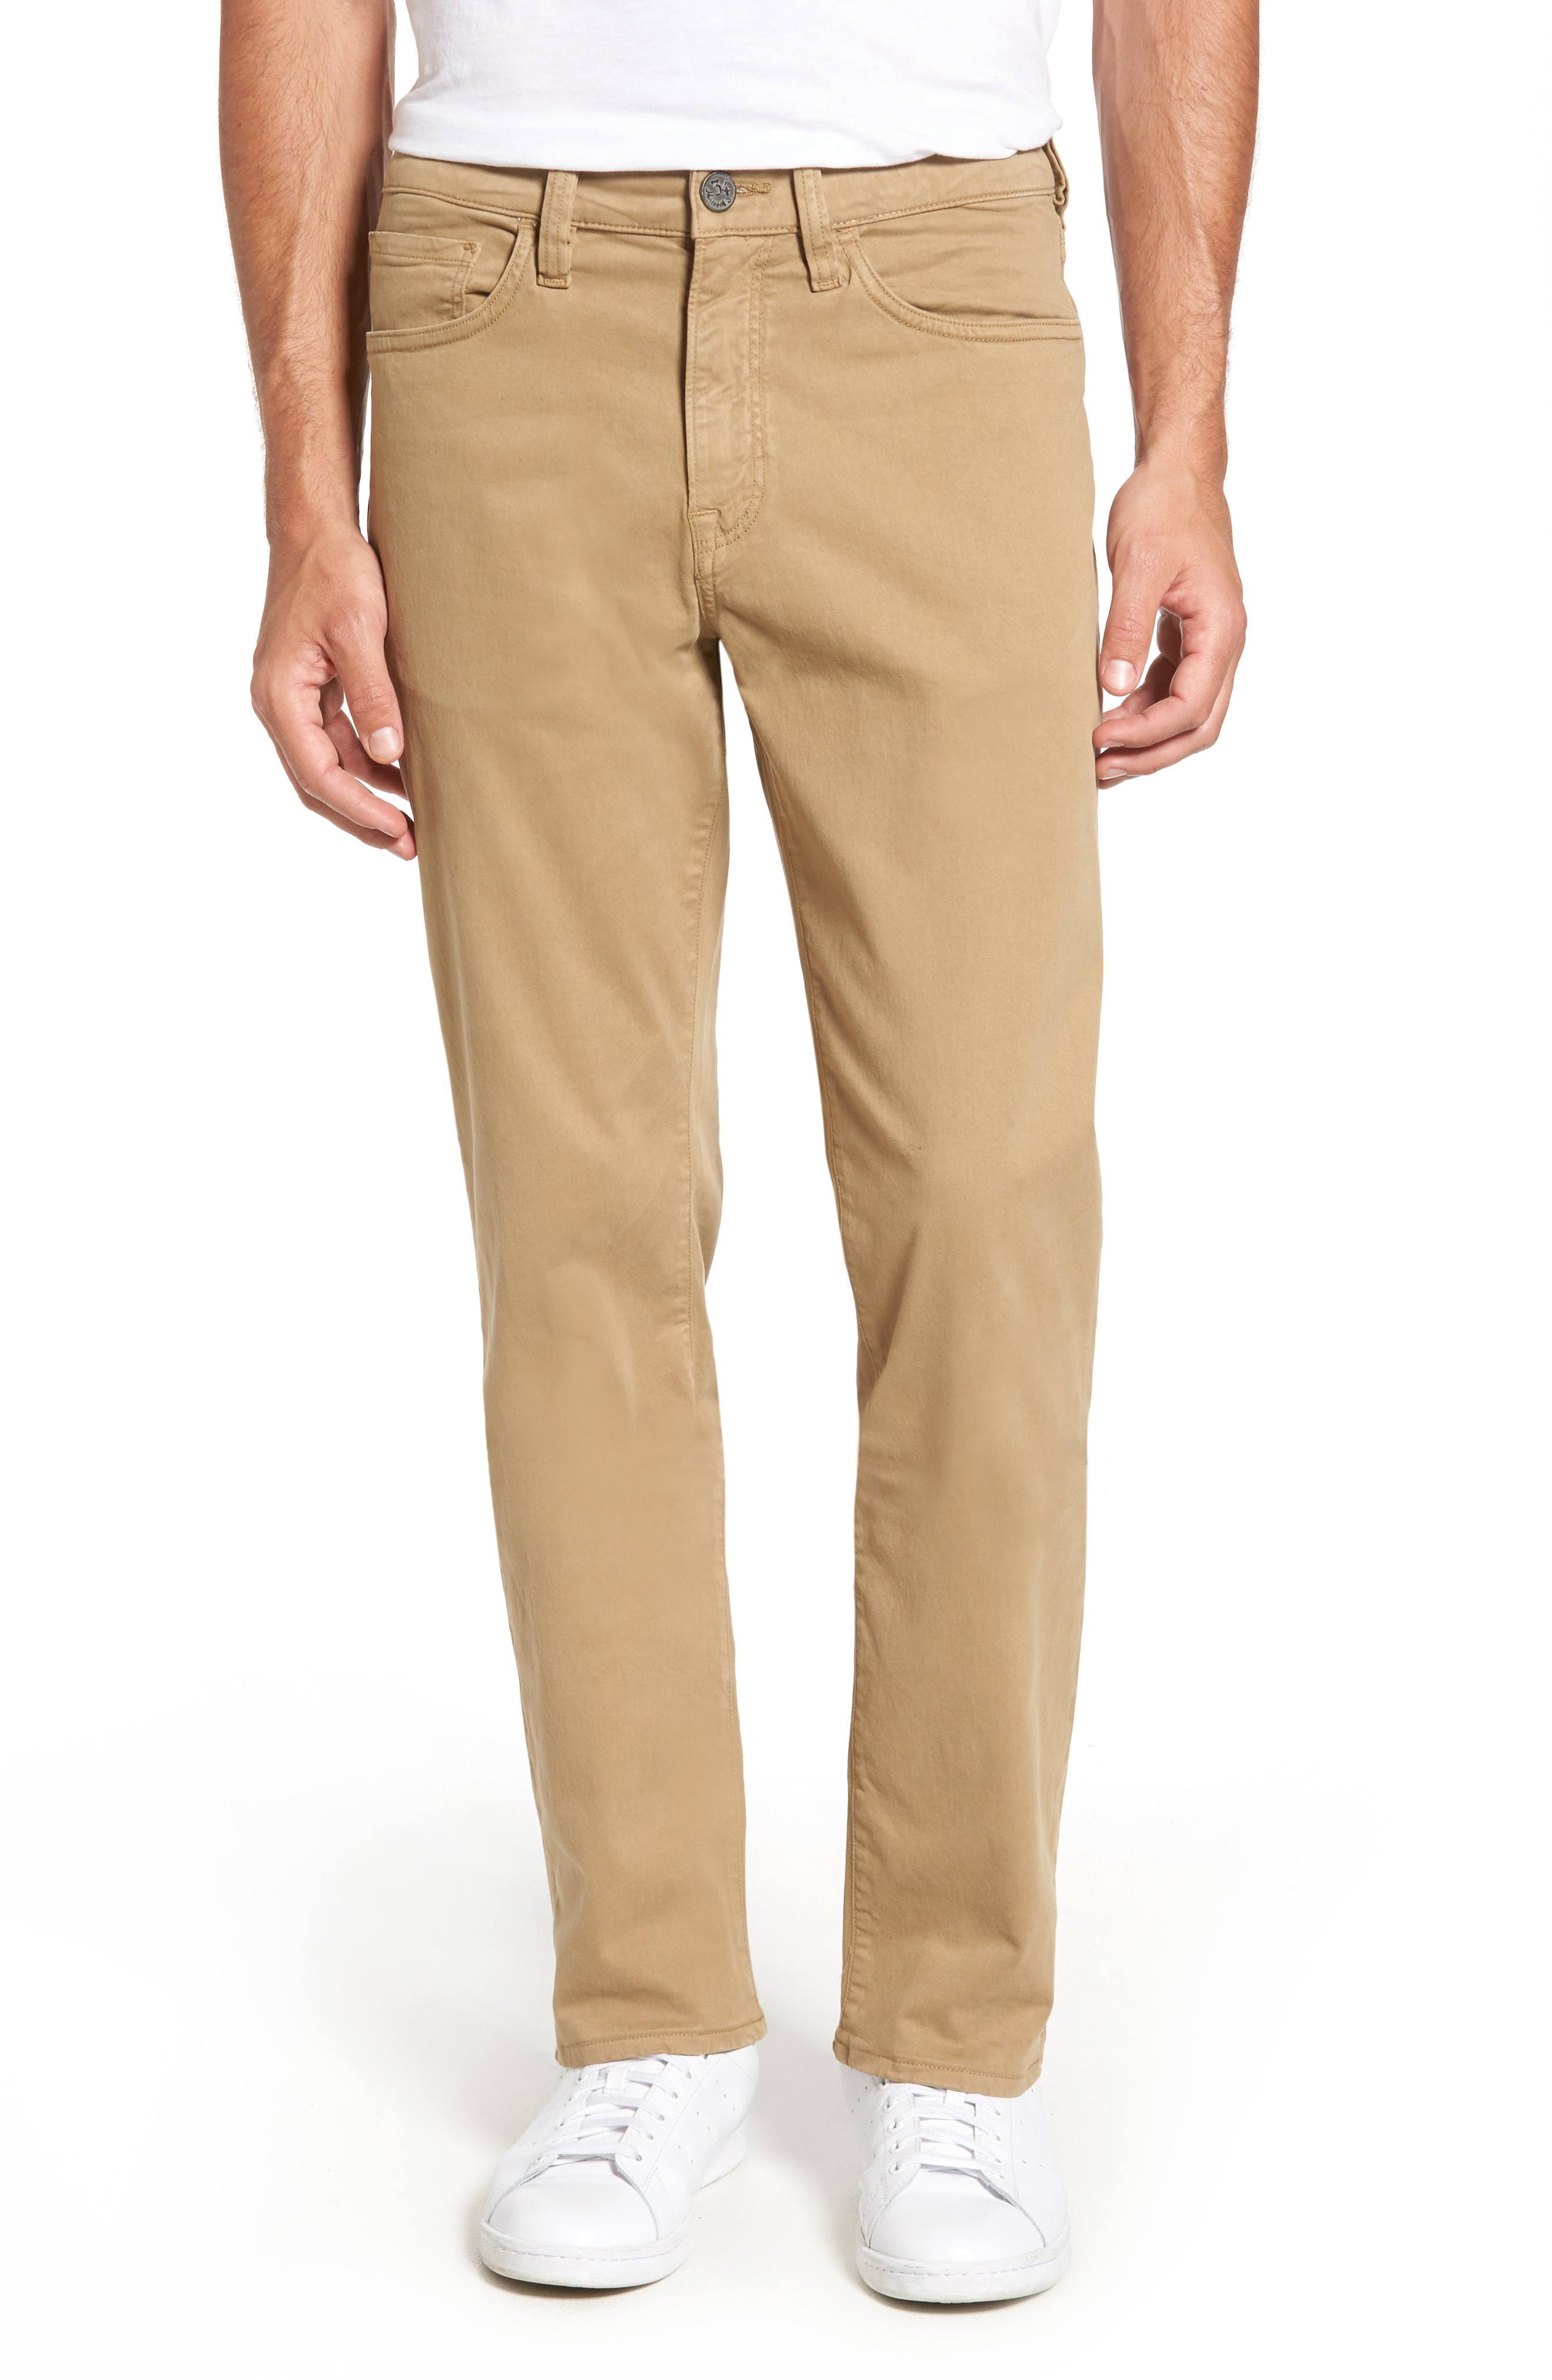 34 Heritage 'Charisma' Classic Relaxed Fit (Khaki Twill) (Online Only) (Regular & Tall)